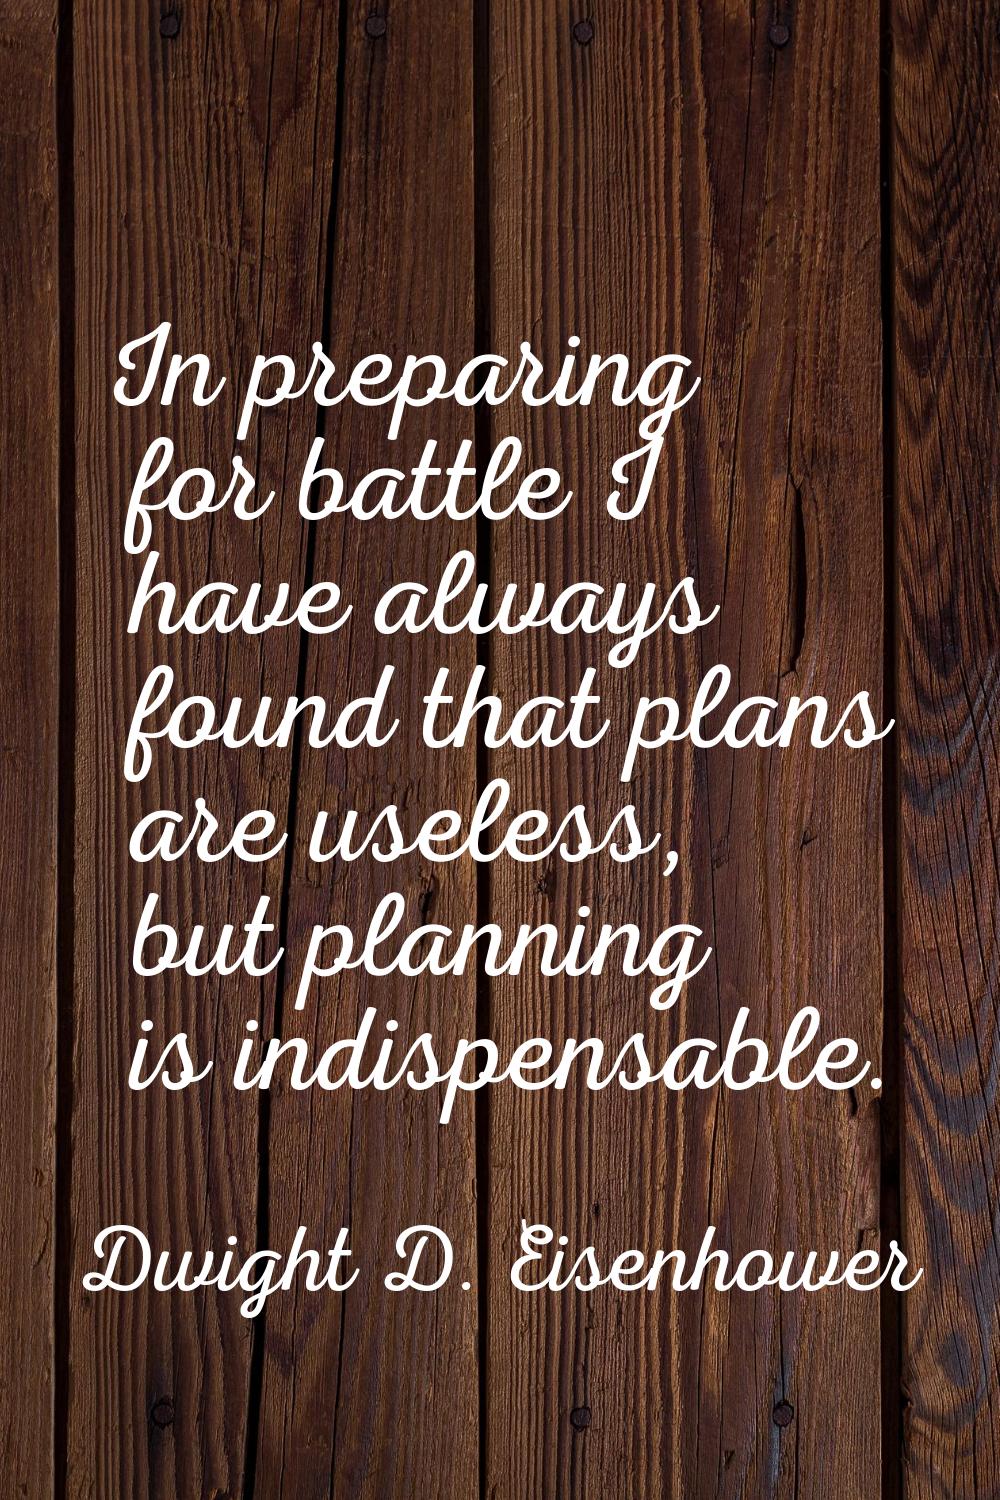 In preparing for battle I have always found that plans are useless, but planning is indispensable.